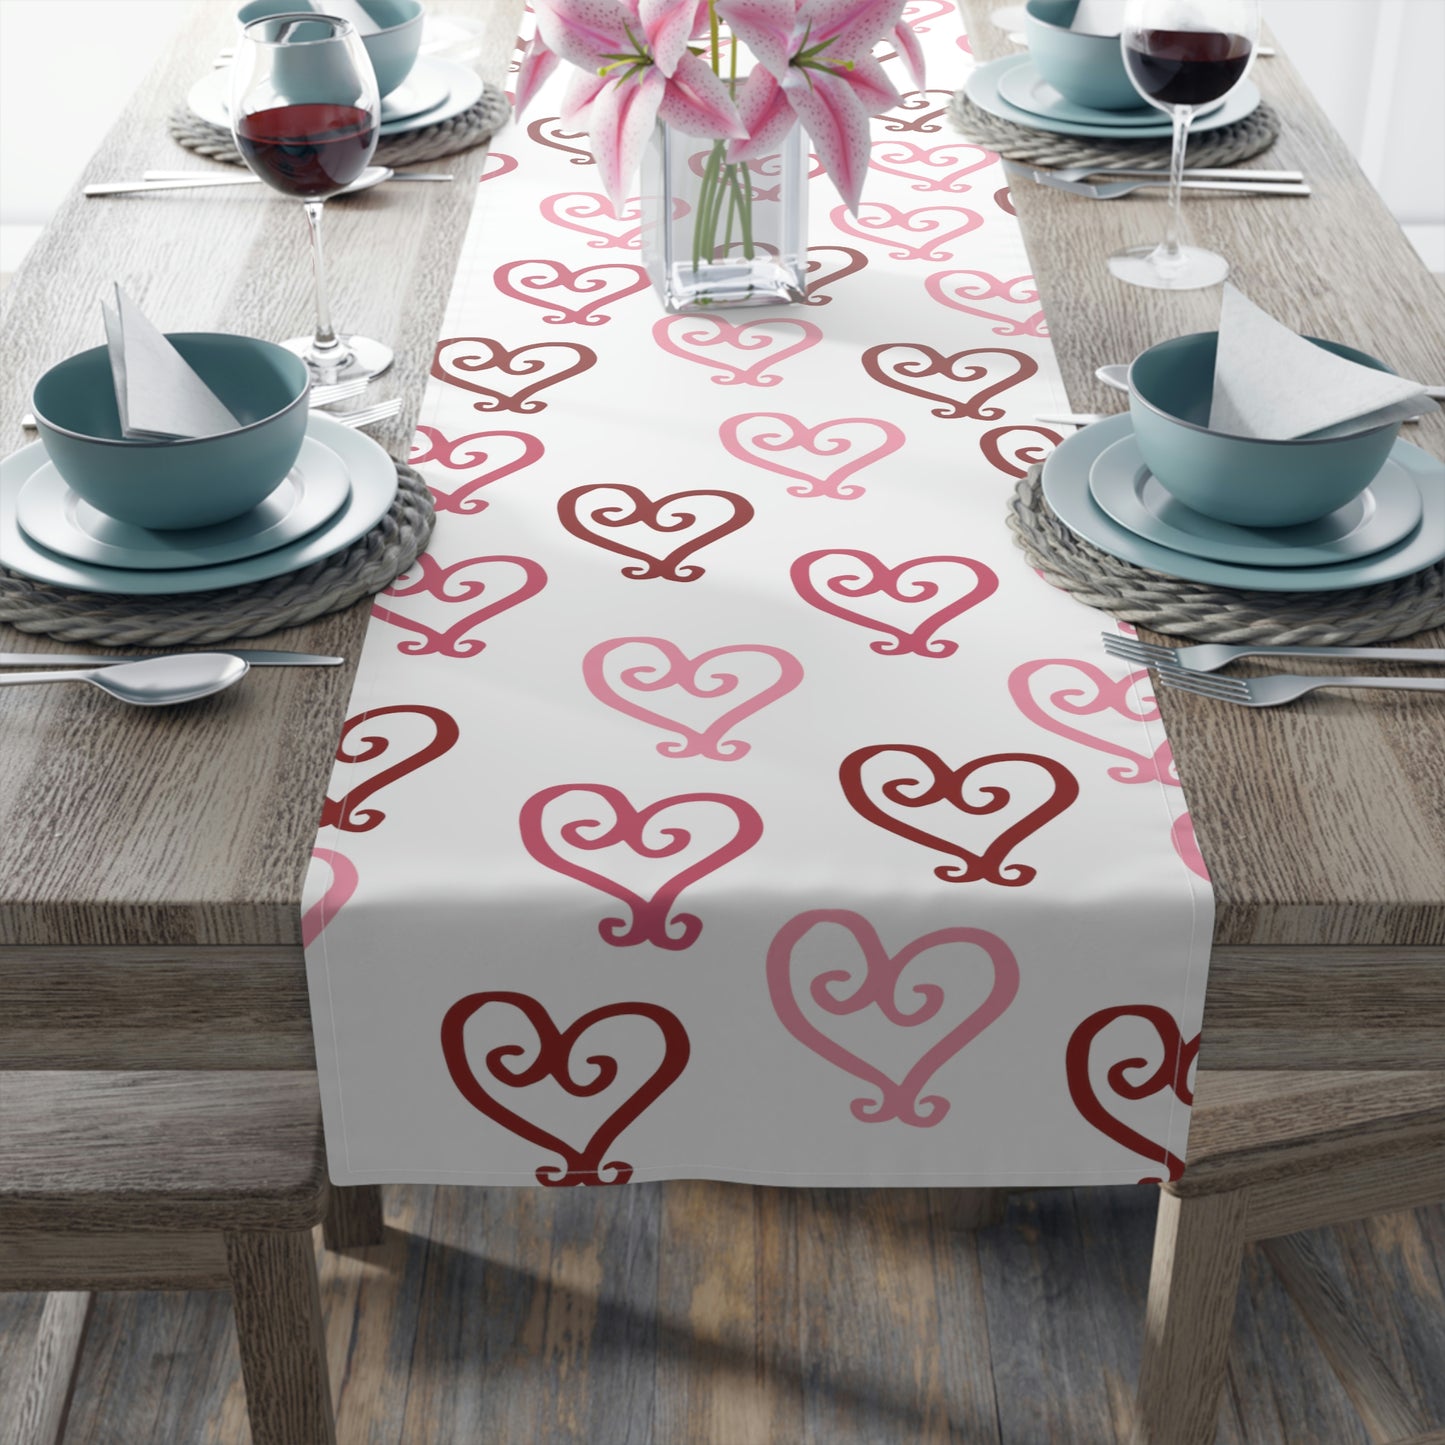 Valentine's Day Table Runner / Valentine's Day Decor / Pink Heart Decor / Red Heart Table Runner / Valentine's Table Decor